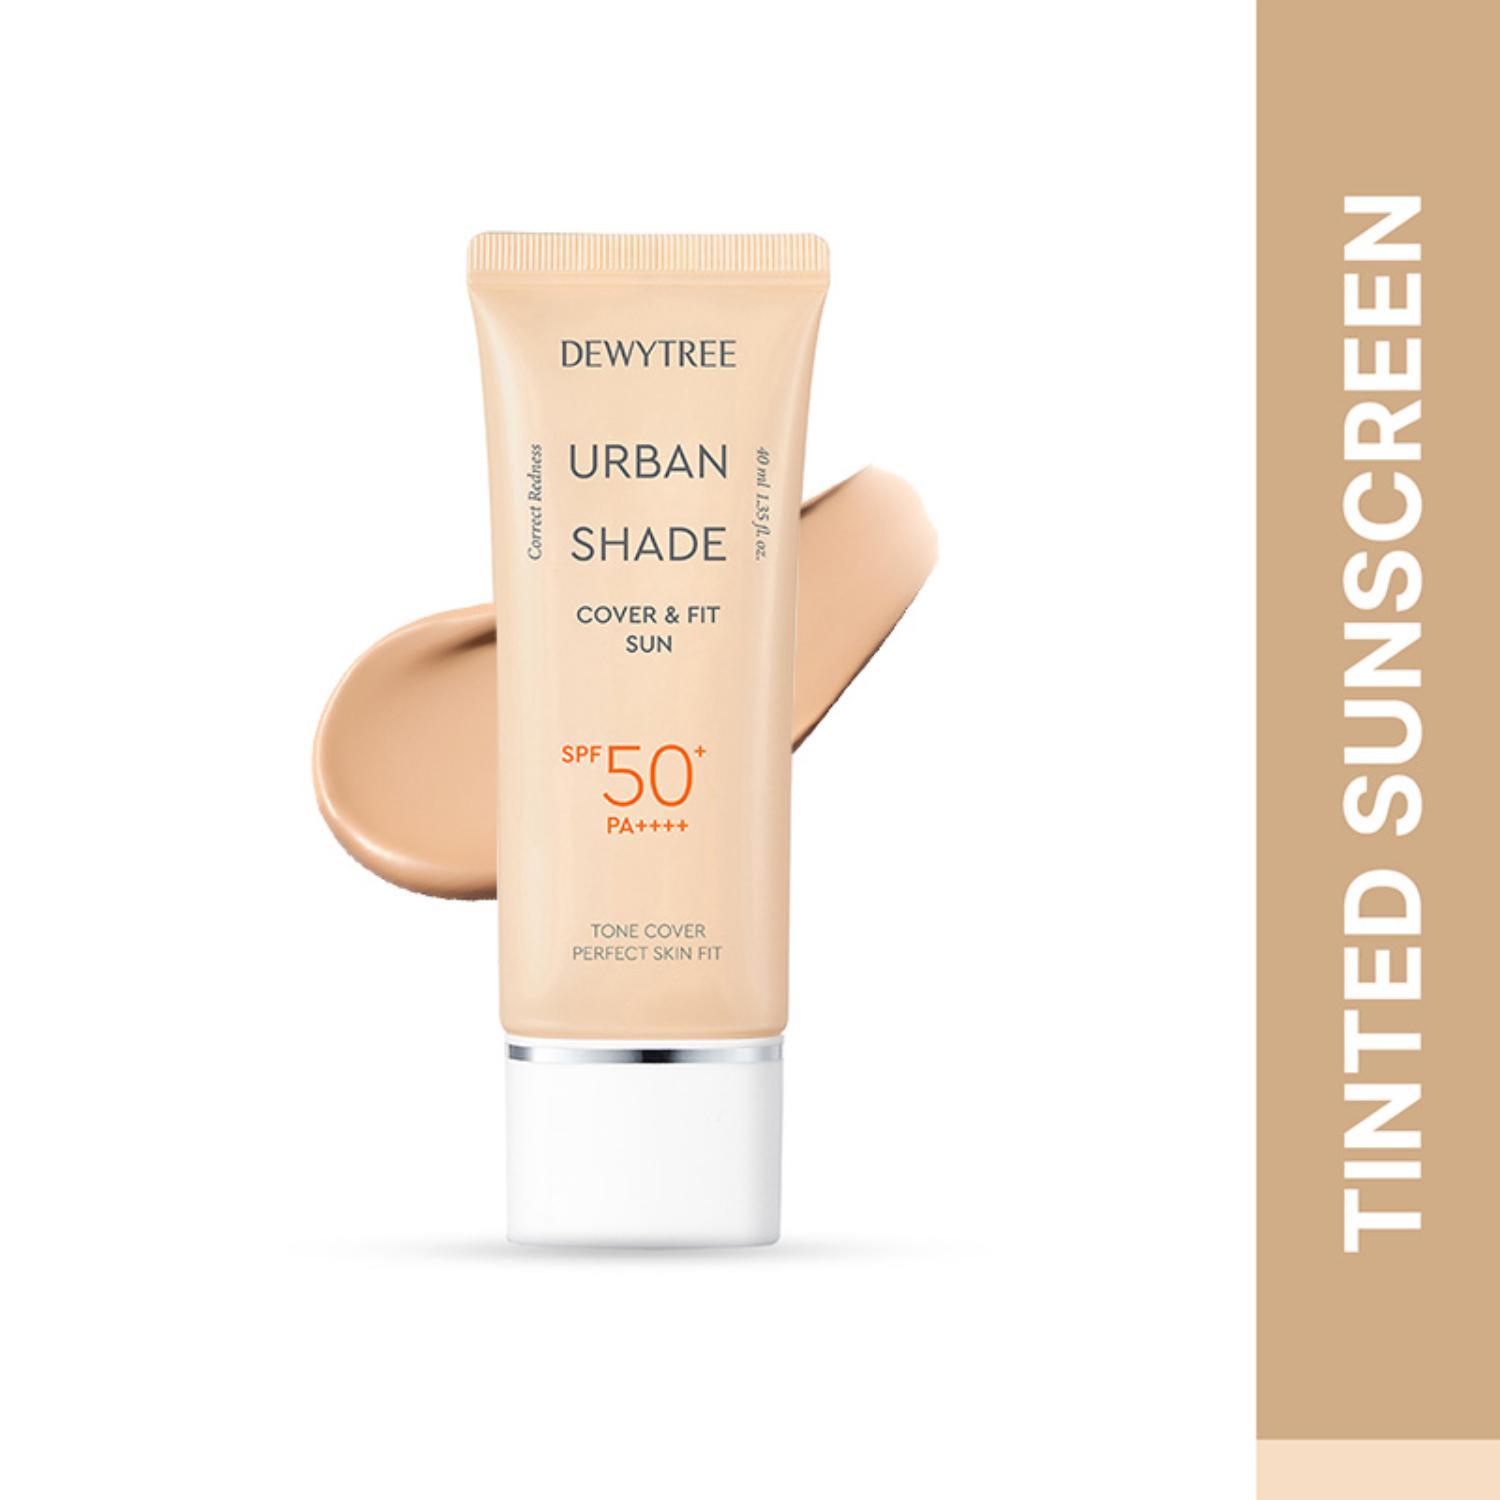 Dewytree Urban Shade Cover and Fit Sunscreen SPF 50+ PA++++ (40ml)